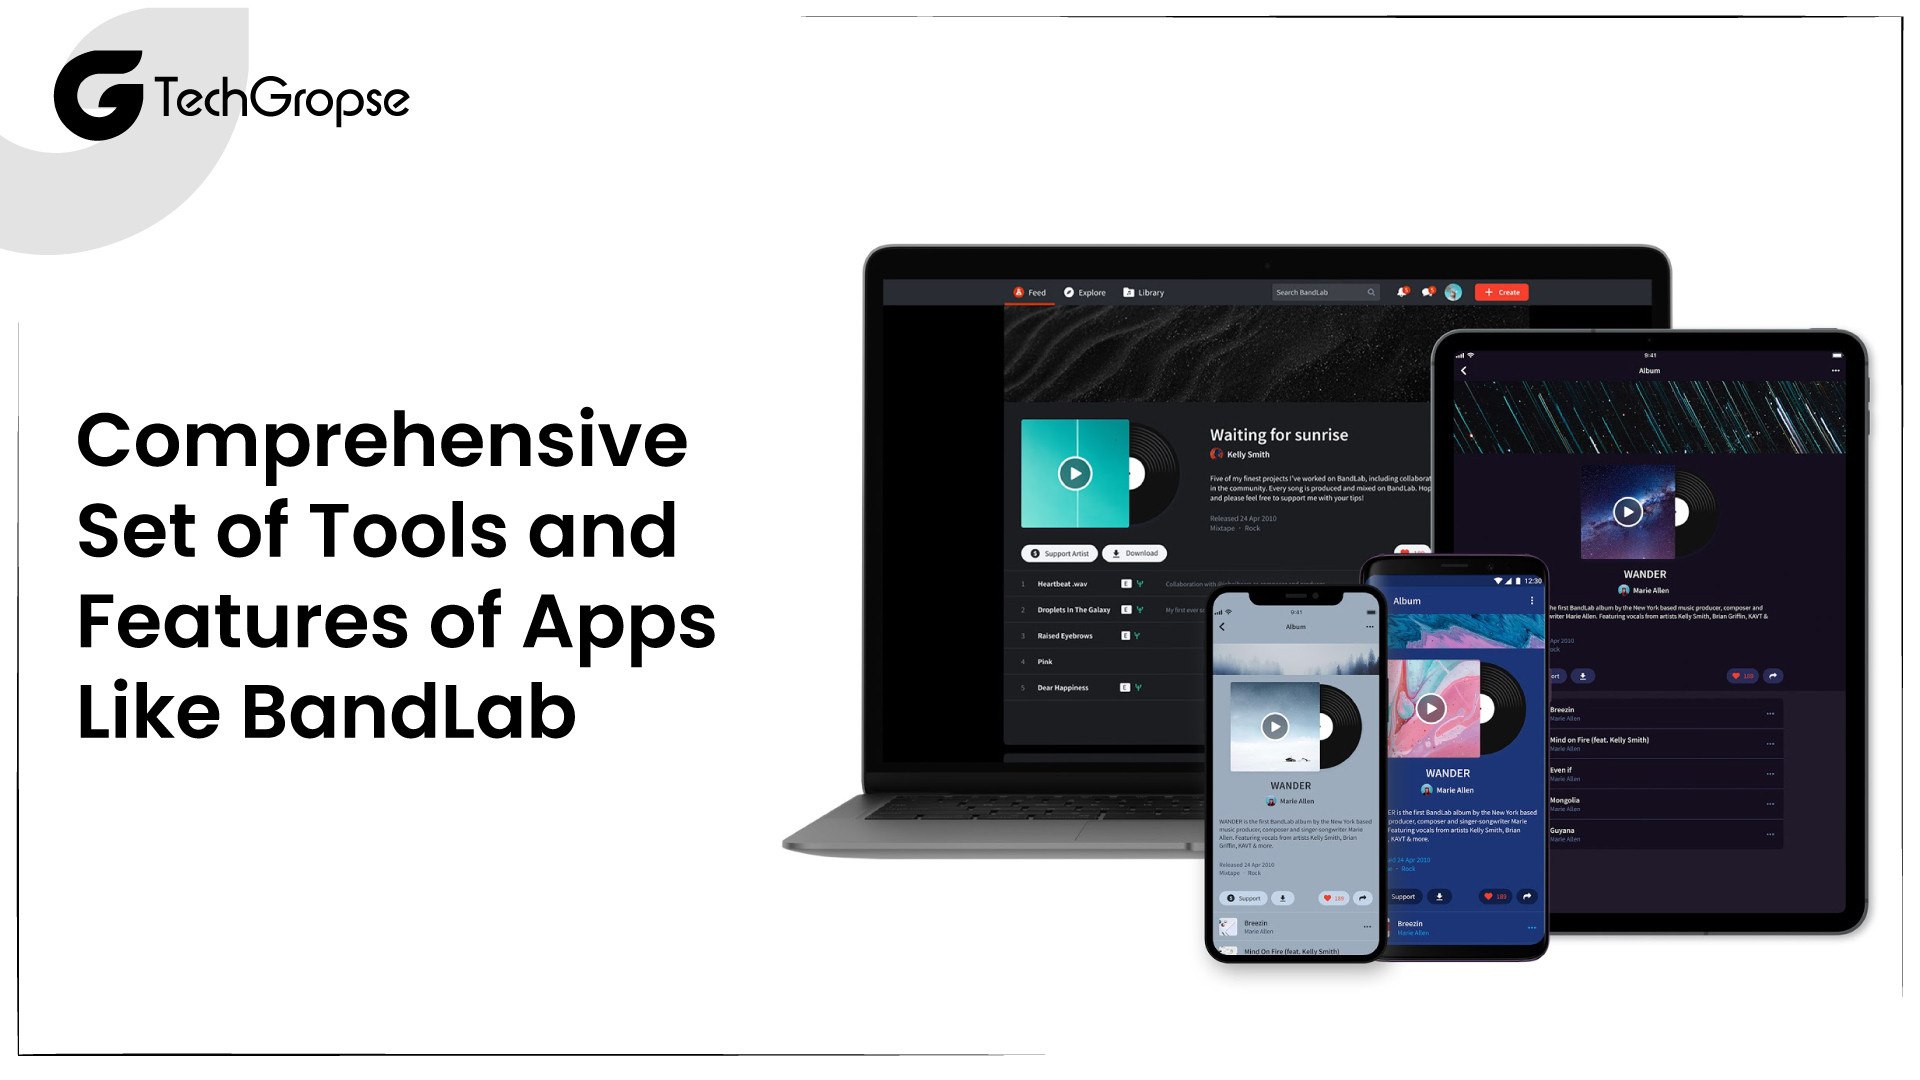 The Comprehensive Set of Tools and Features of Apps Like BandLab